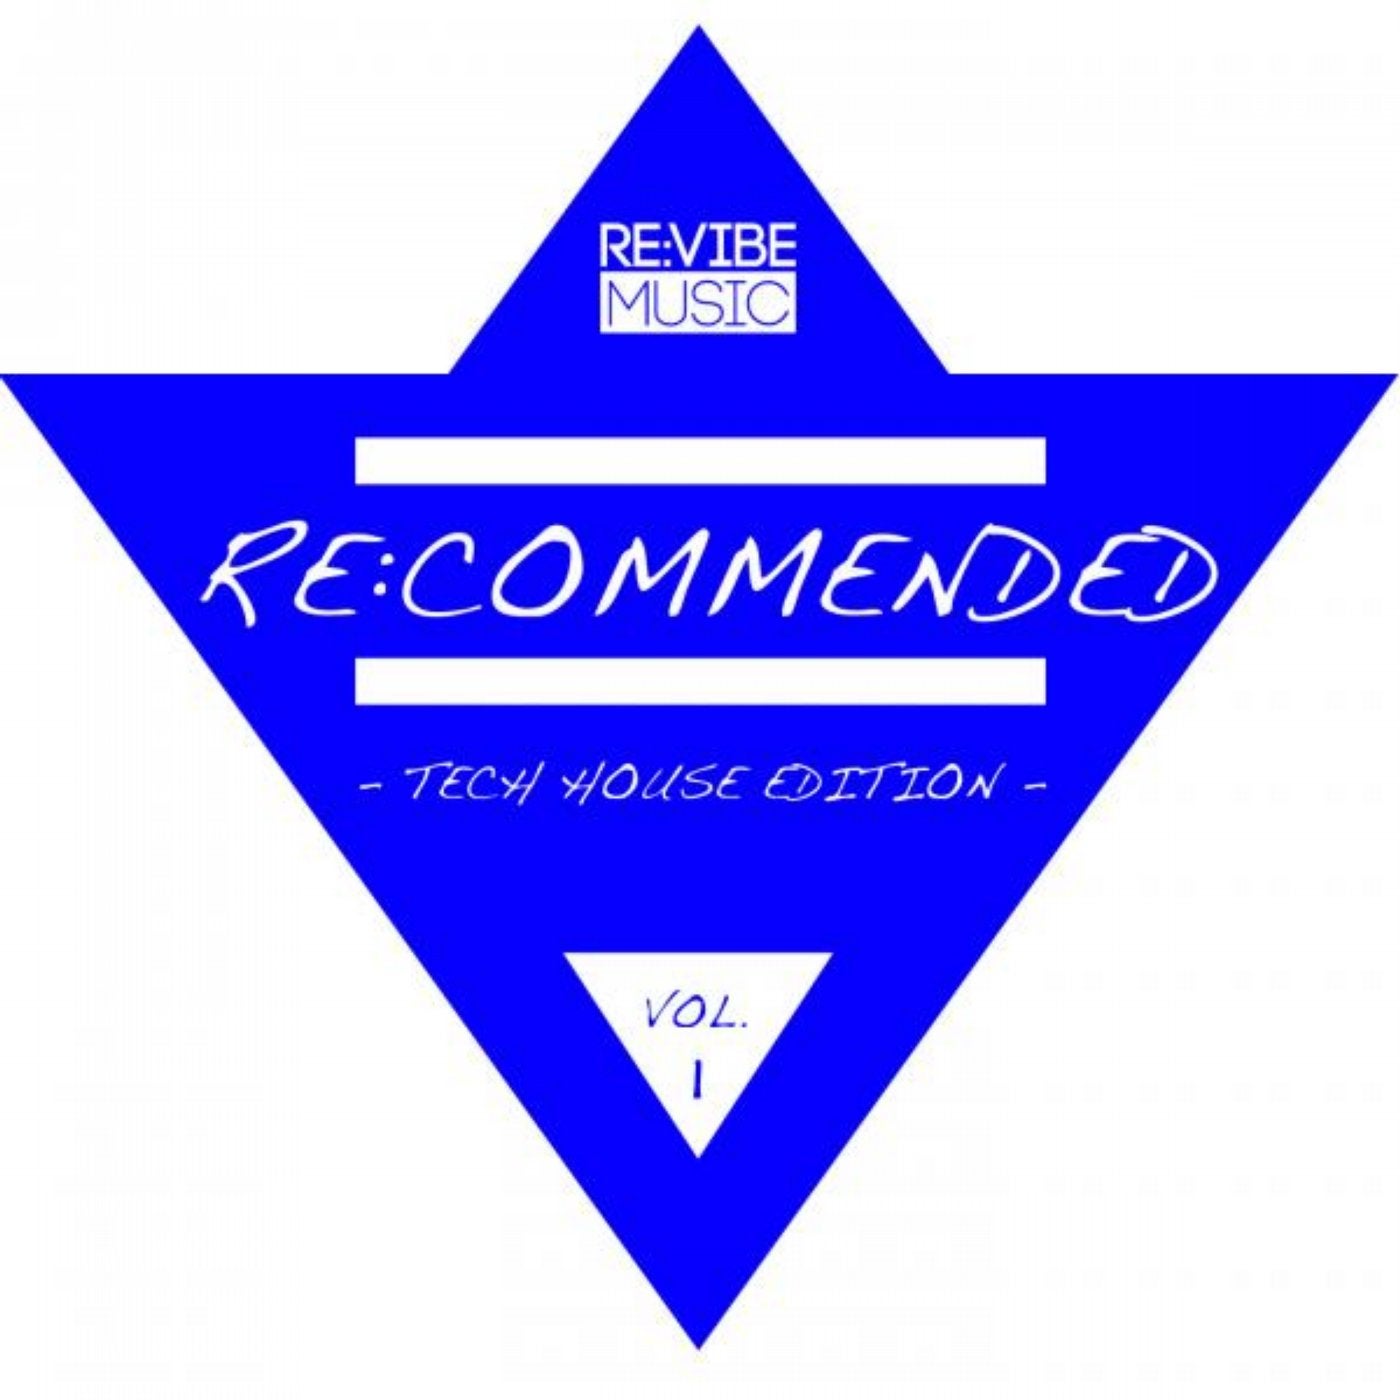 Re:Commended - Tech House Edition, Vol. 1